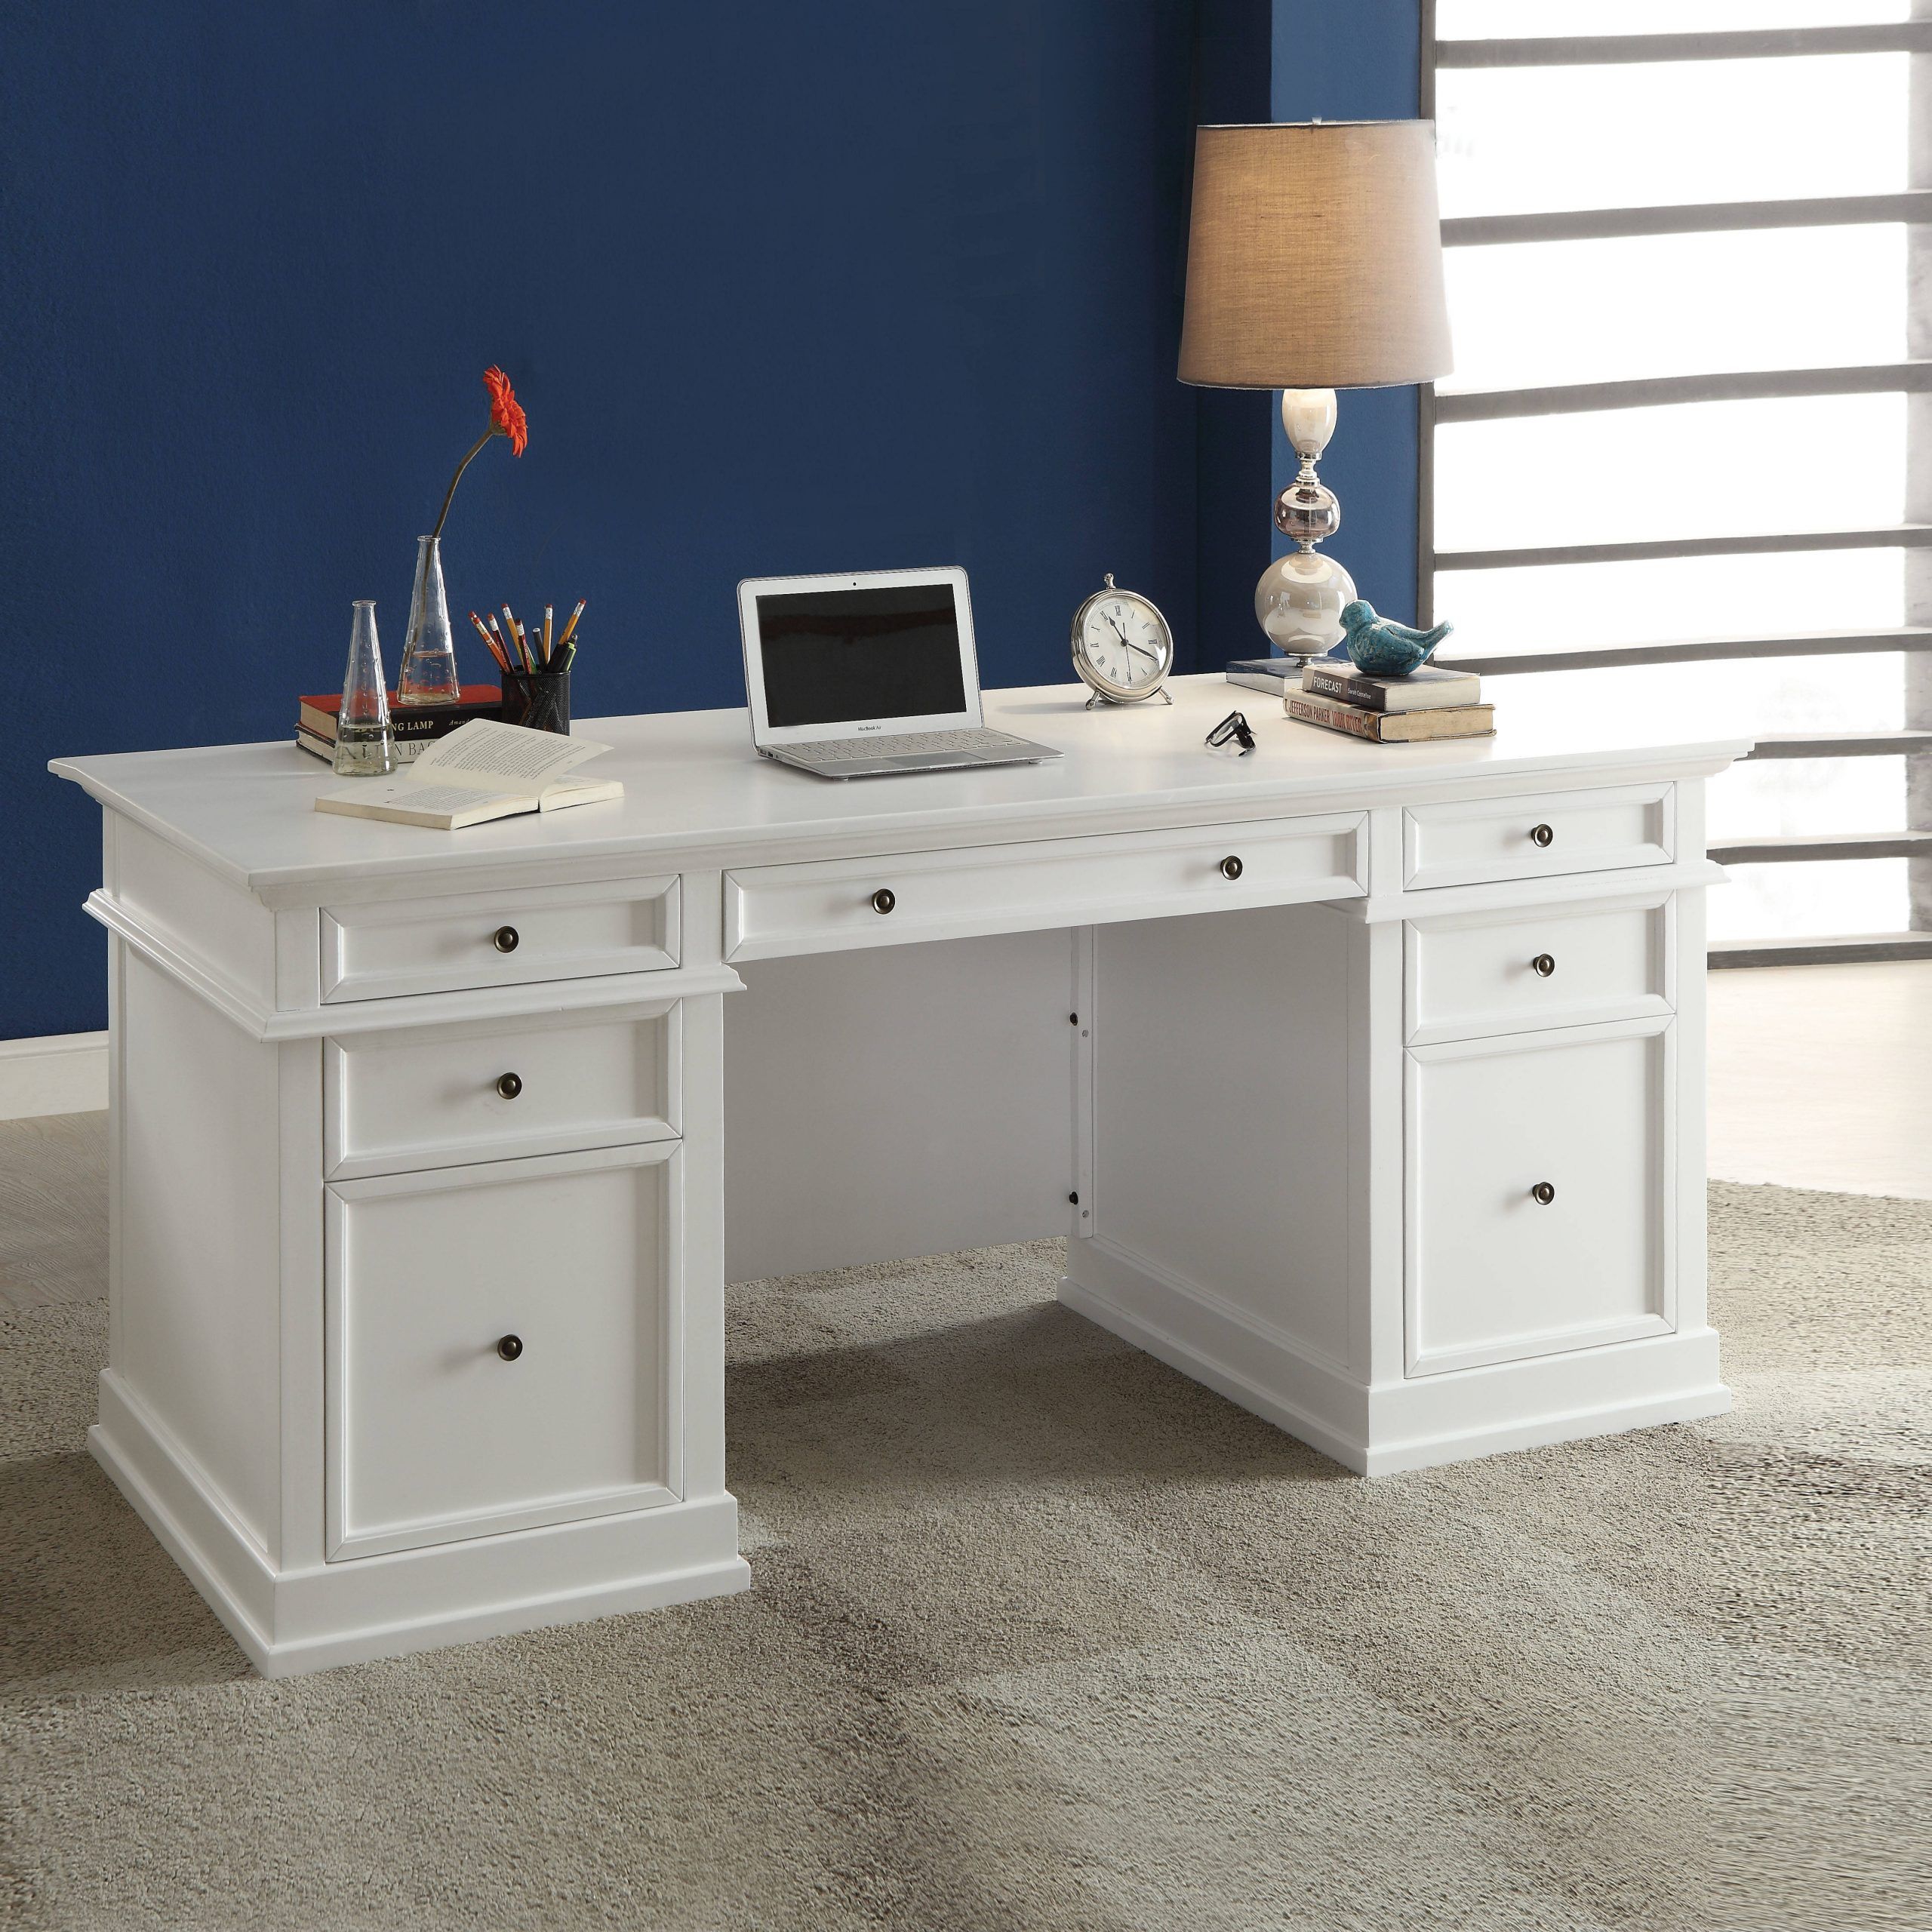 Acme Furniture Daiki White Desk | The Classy Home Intended For White Glass And Natural Wood Office Desks (View 10 of 15)